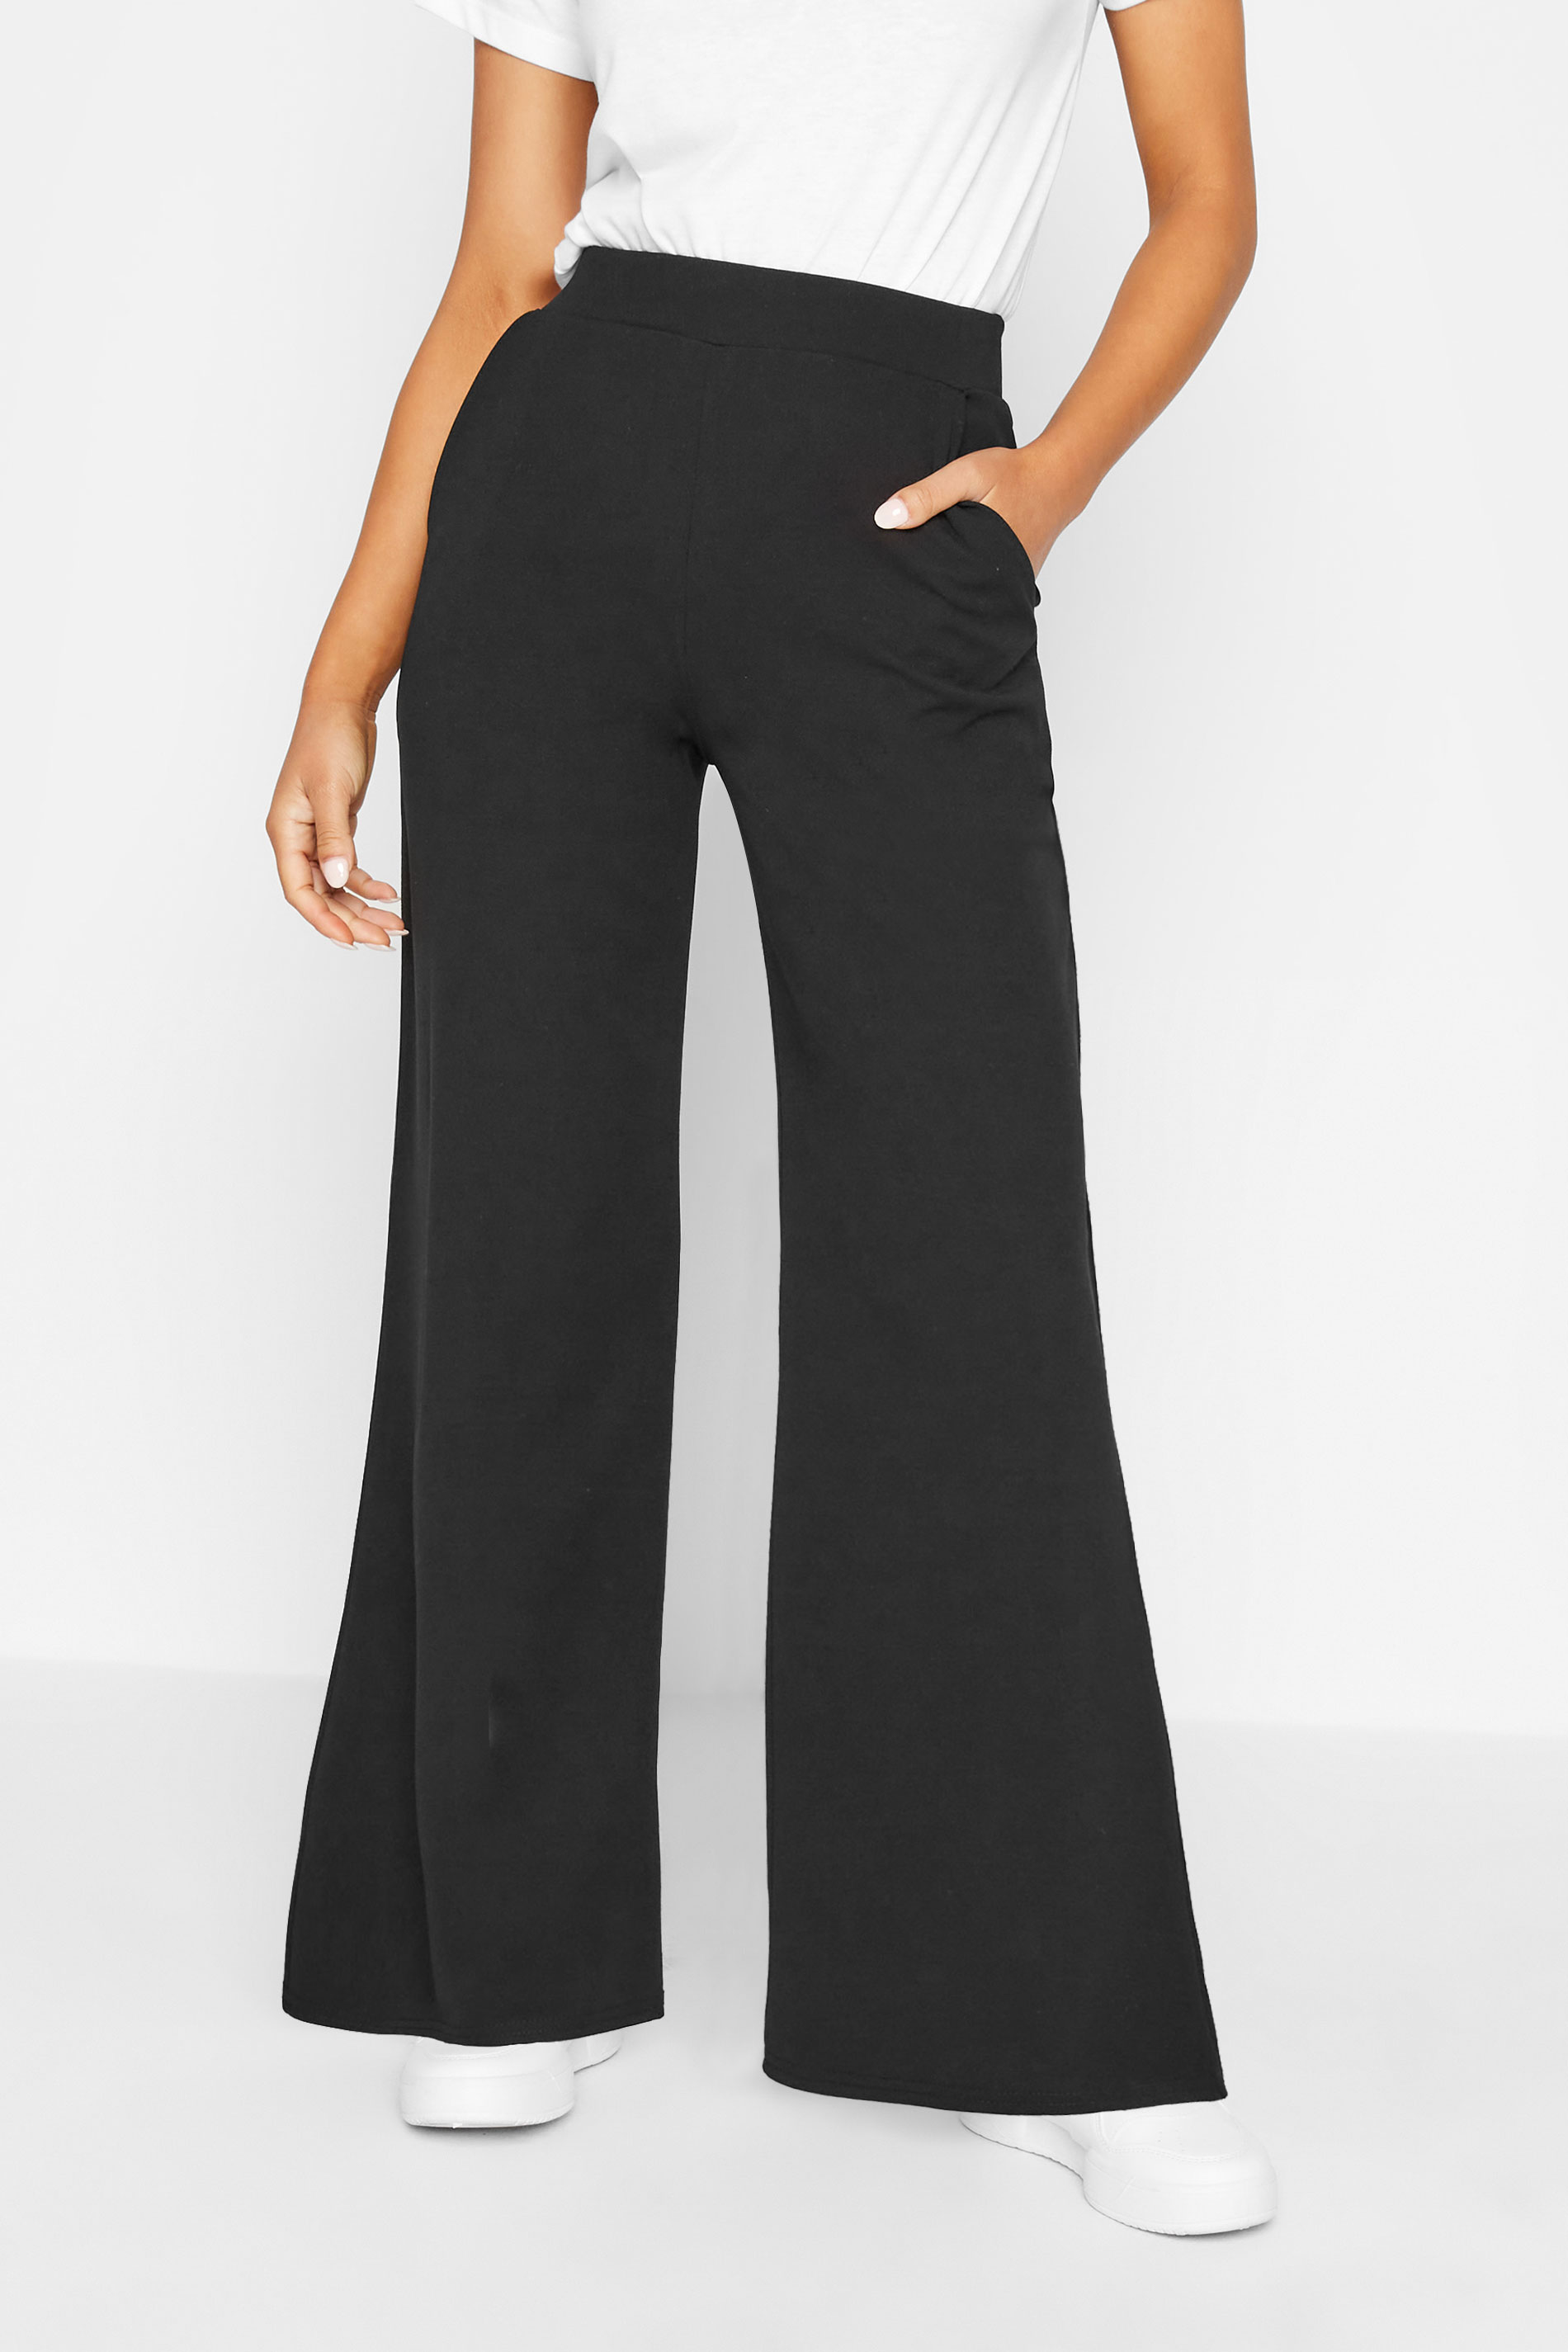 Petite Black Crinkle Wide Leg Trouser  In The Style